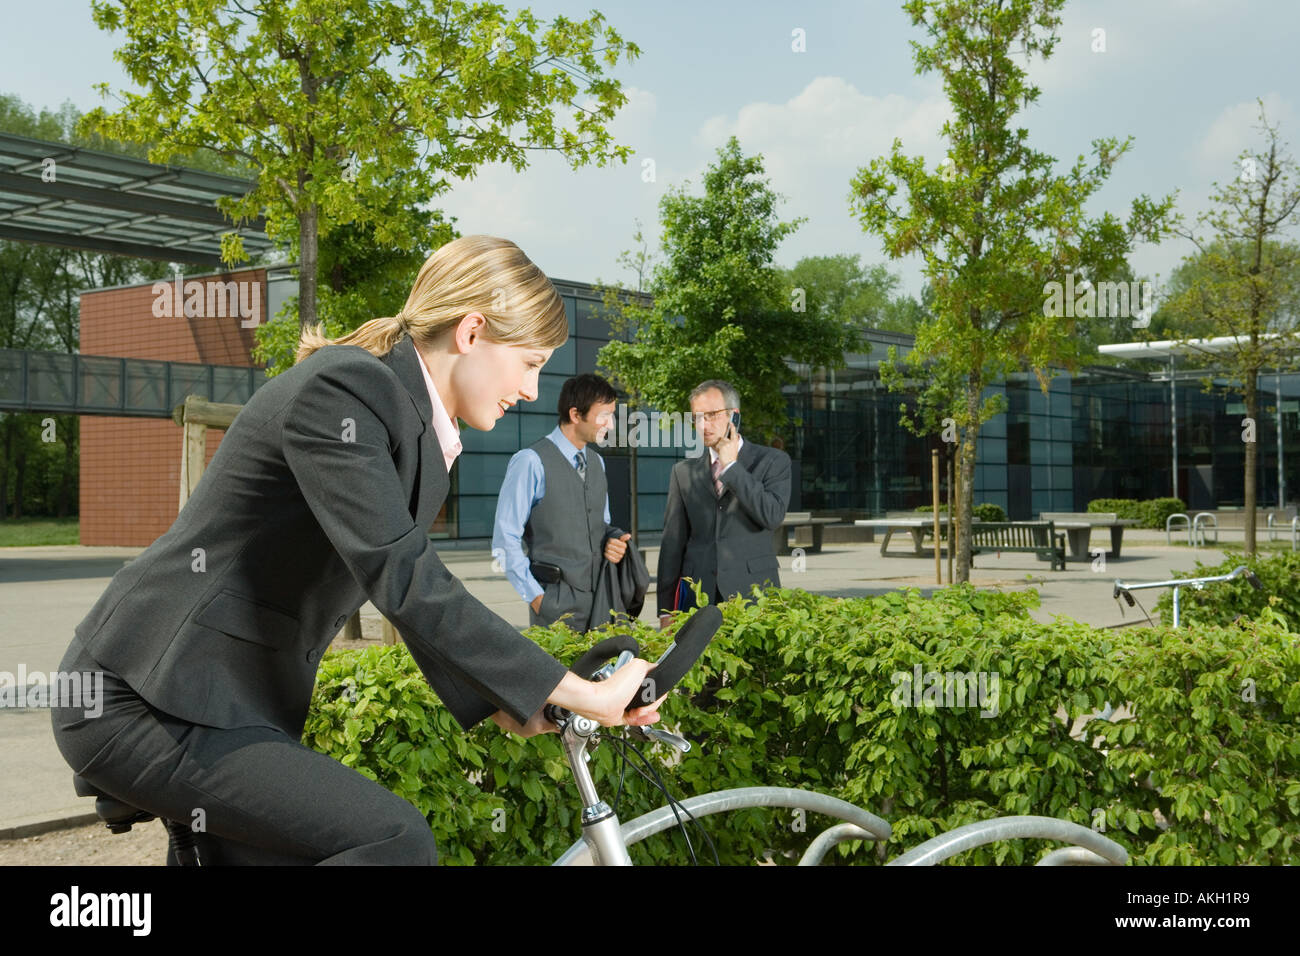 Woman on bike, two businessmen on background Stock Photo